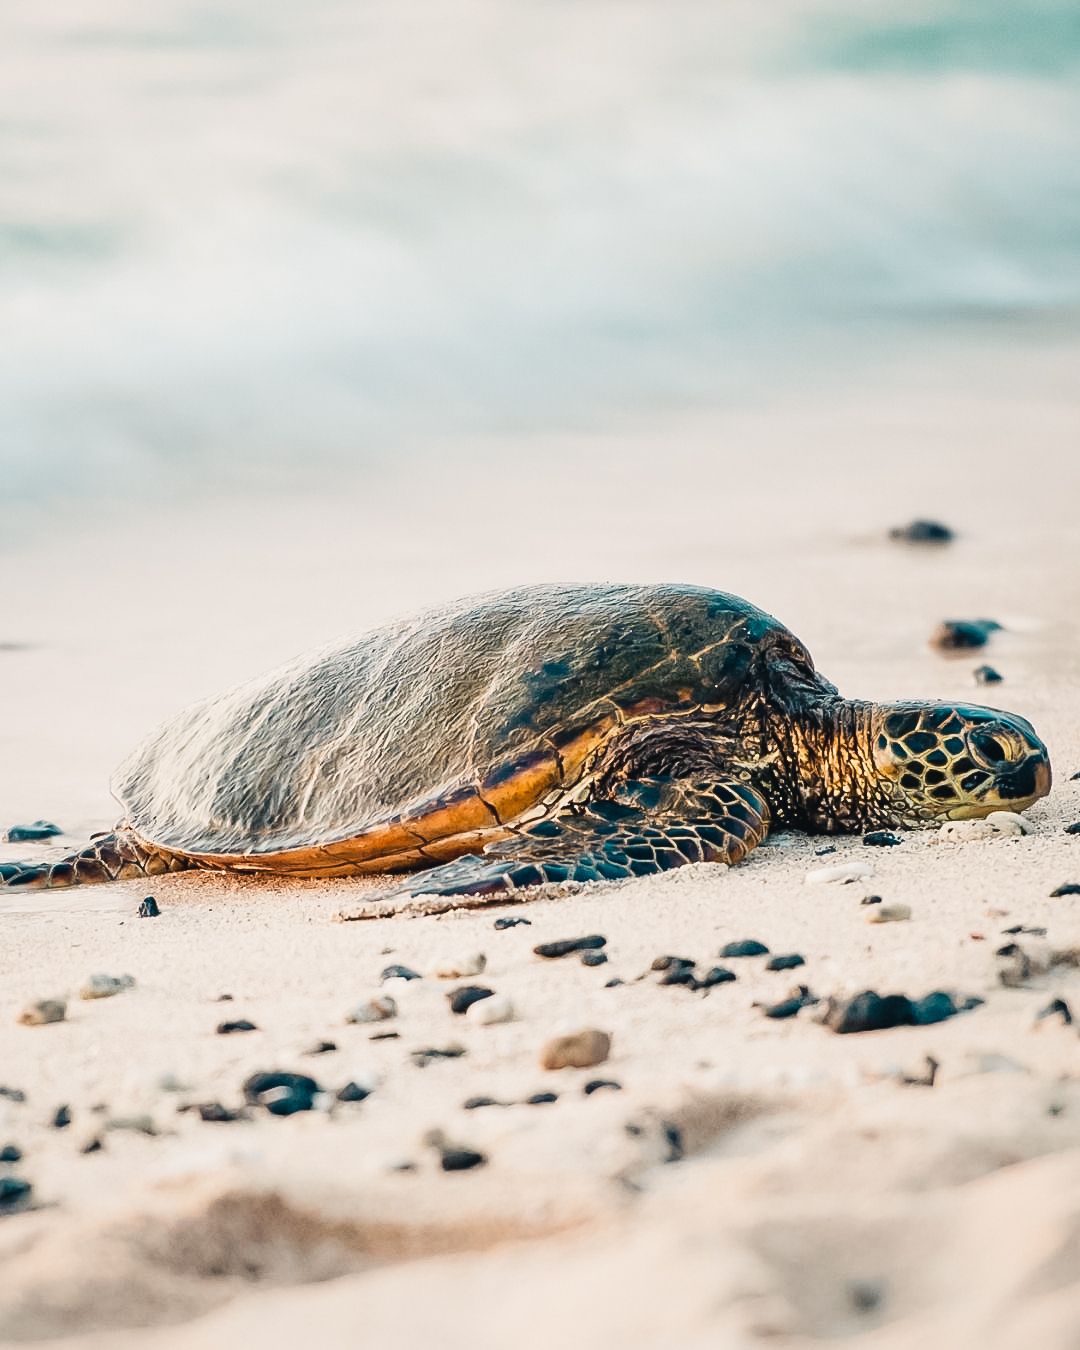 A turtle resting on the beach - Sea turtle